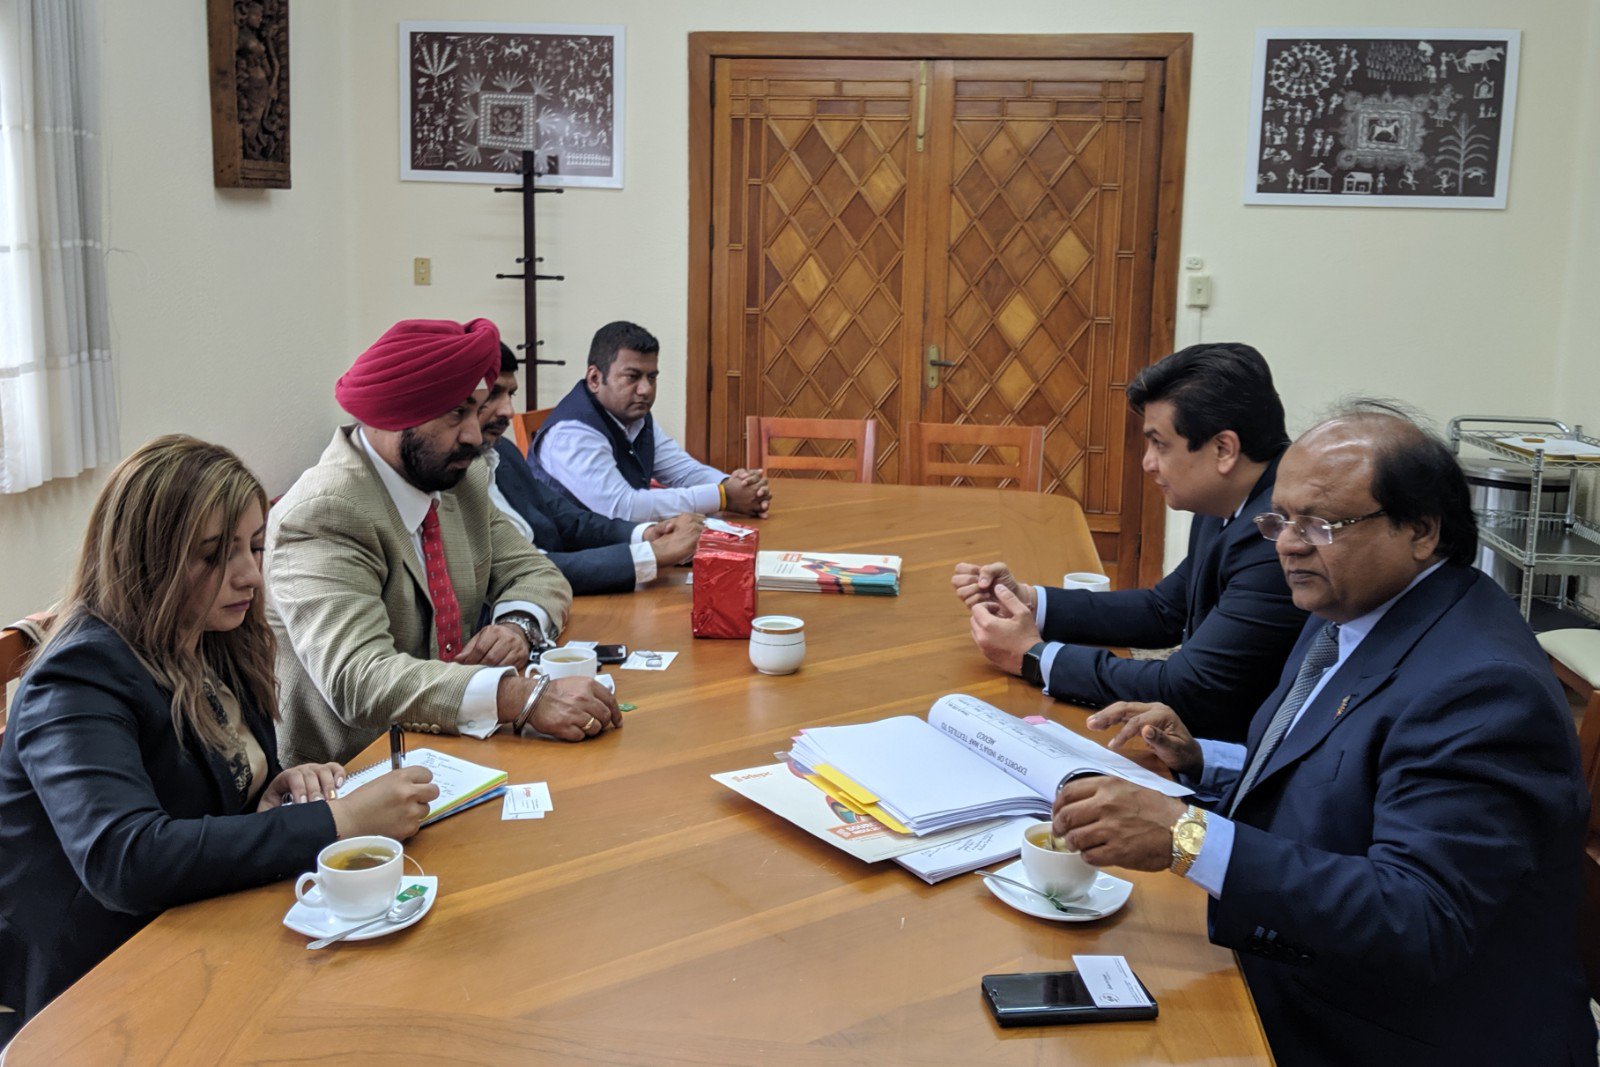 A delegation of visited Mexico on 27-28 June, 2019. The Council met with National Chamber of Textiles, National Chamber of Apparels, Indian textile merchants and Chamber of Commerce of Guadalajara.